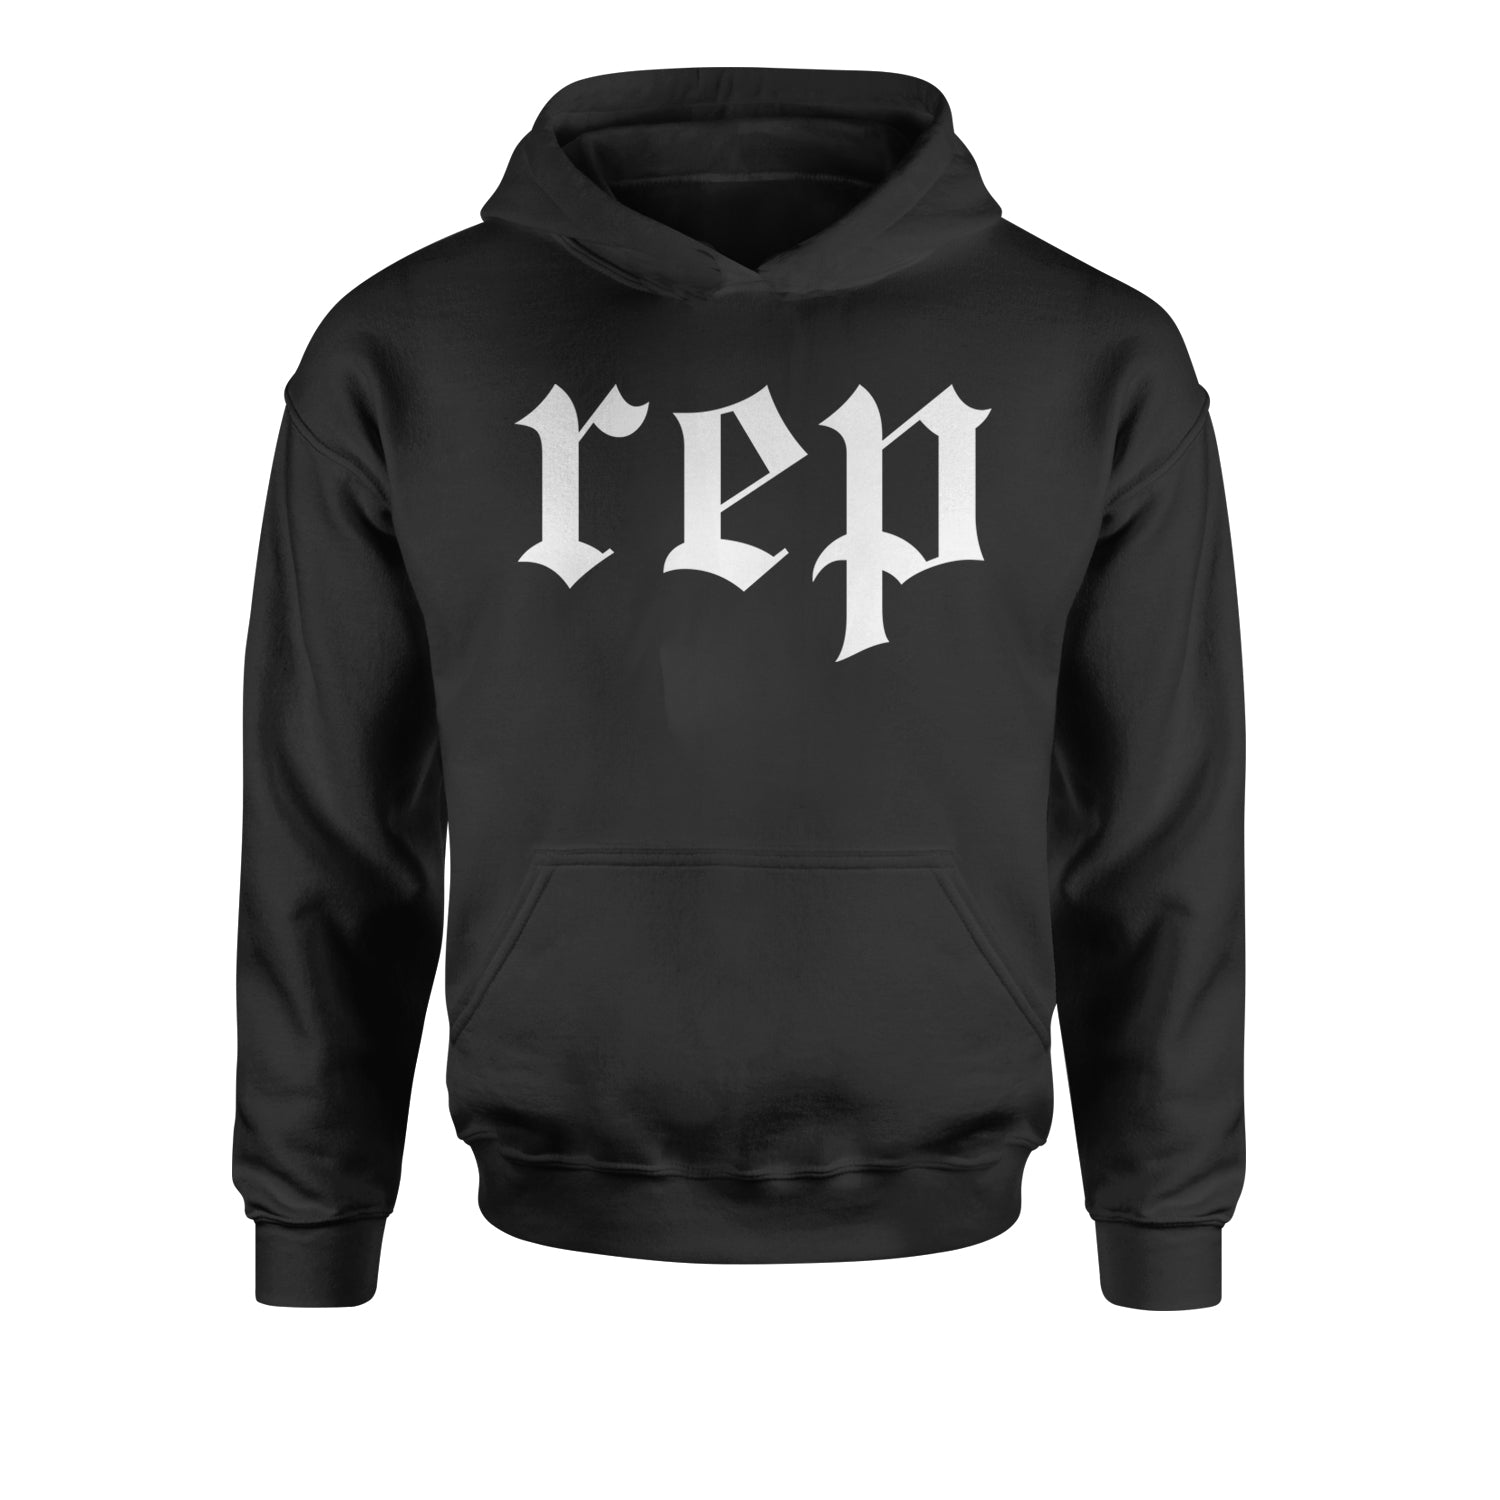 REP Reputation Music Lover Gift Fan Favorite Youth-Sized Hoodie